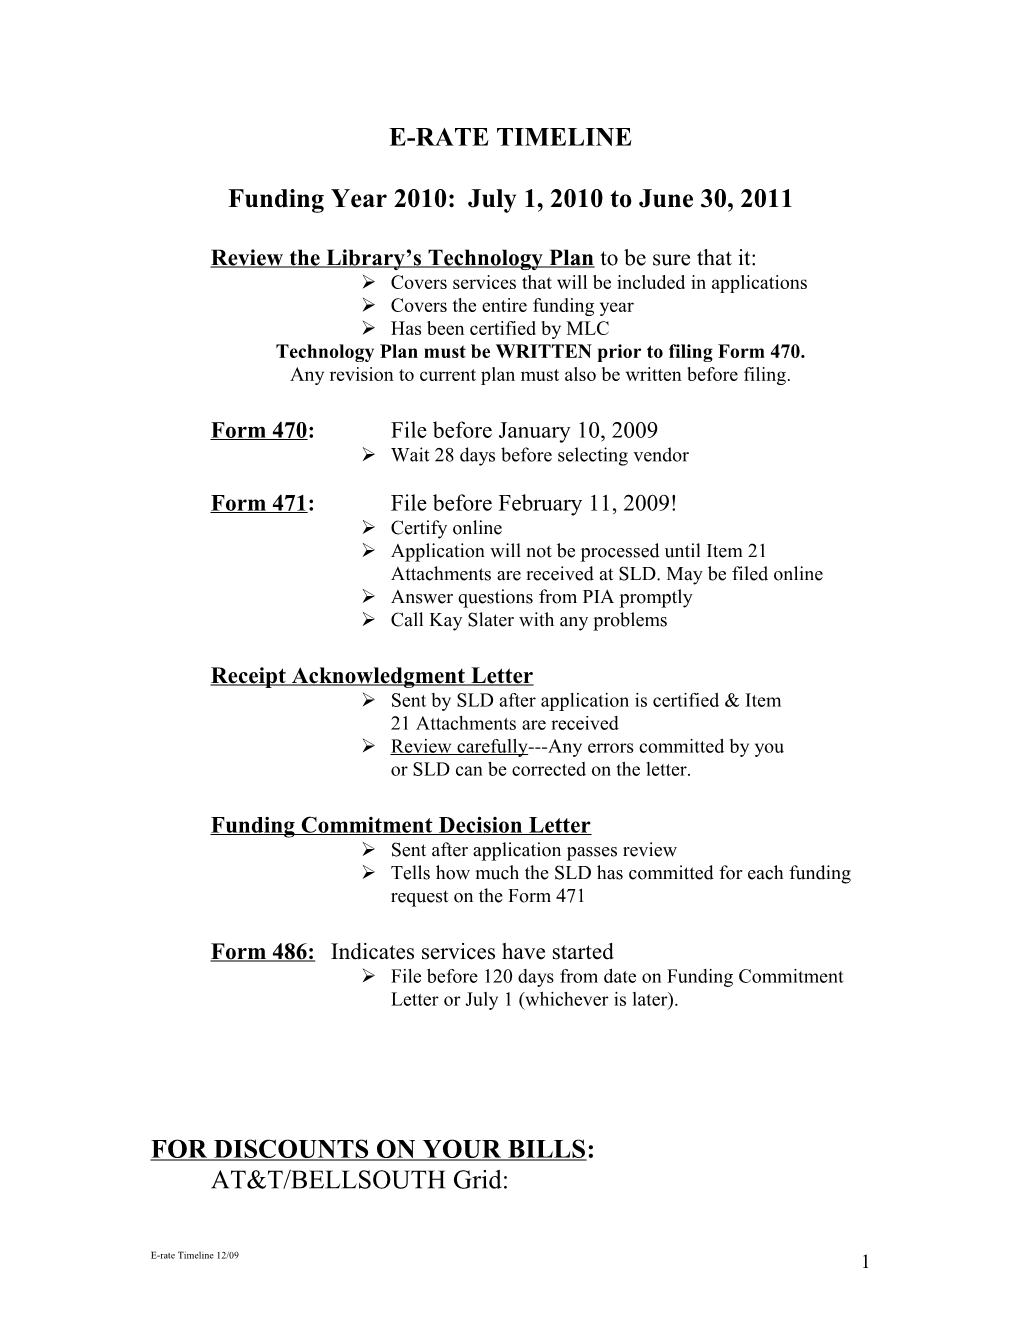 Funding Year 2010: July 1, 2010 to June 30, 2011